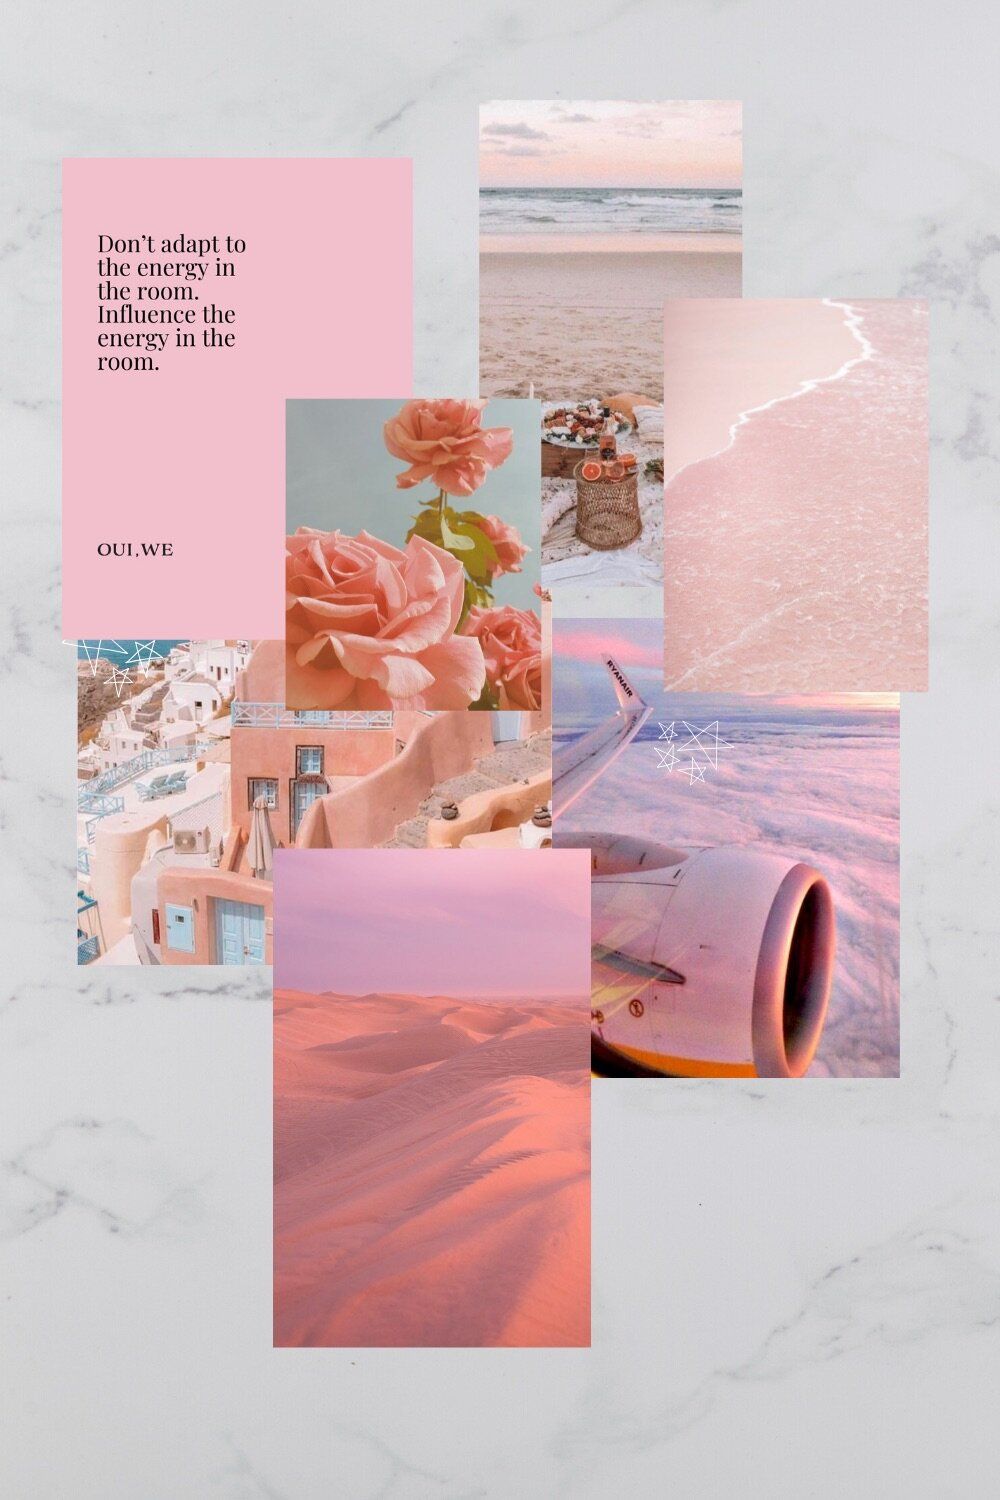 Free Tumblr-Inspired Wallpapers for iPhone  — Oui We